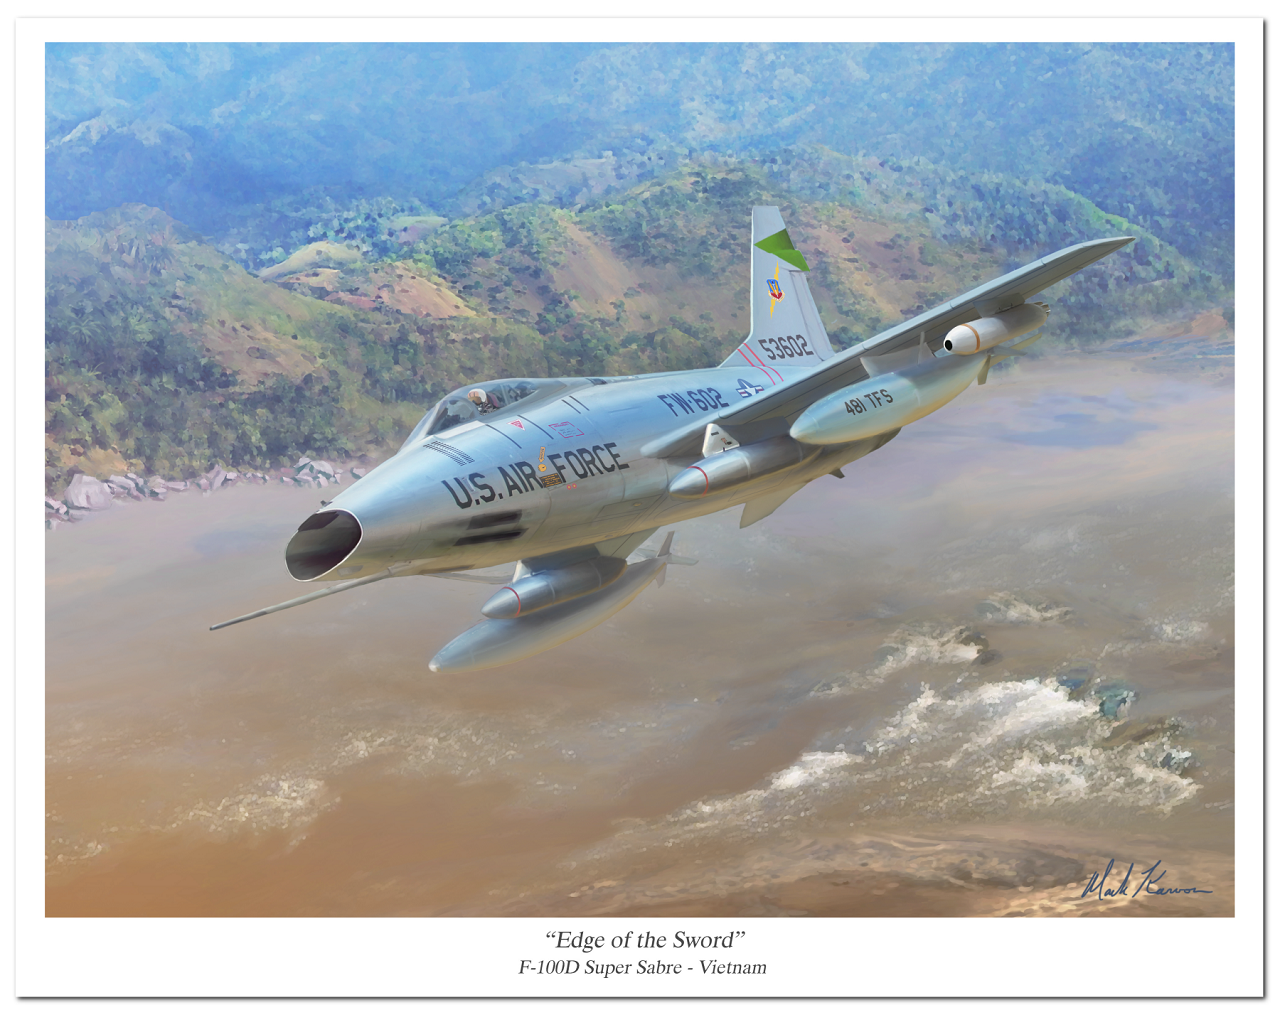 "Edge of the Sword" by Mark Karvon featuring the USAF F-100D Super Sabre in Vietnam